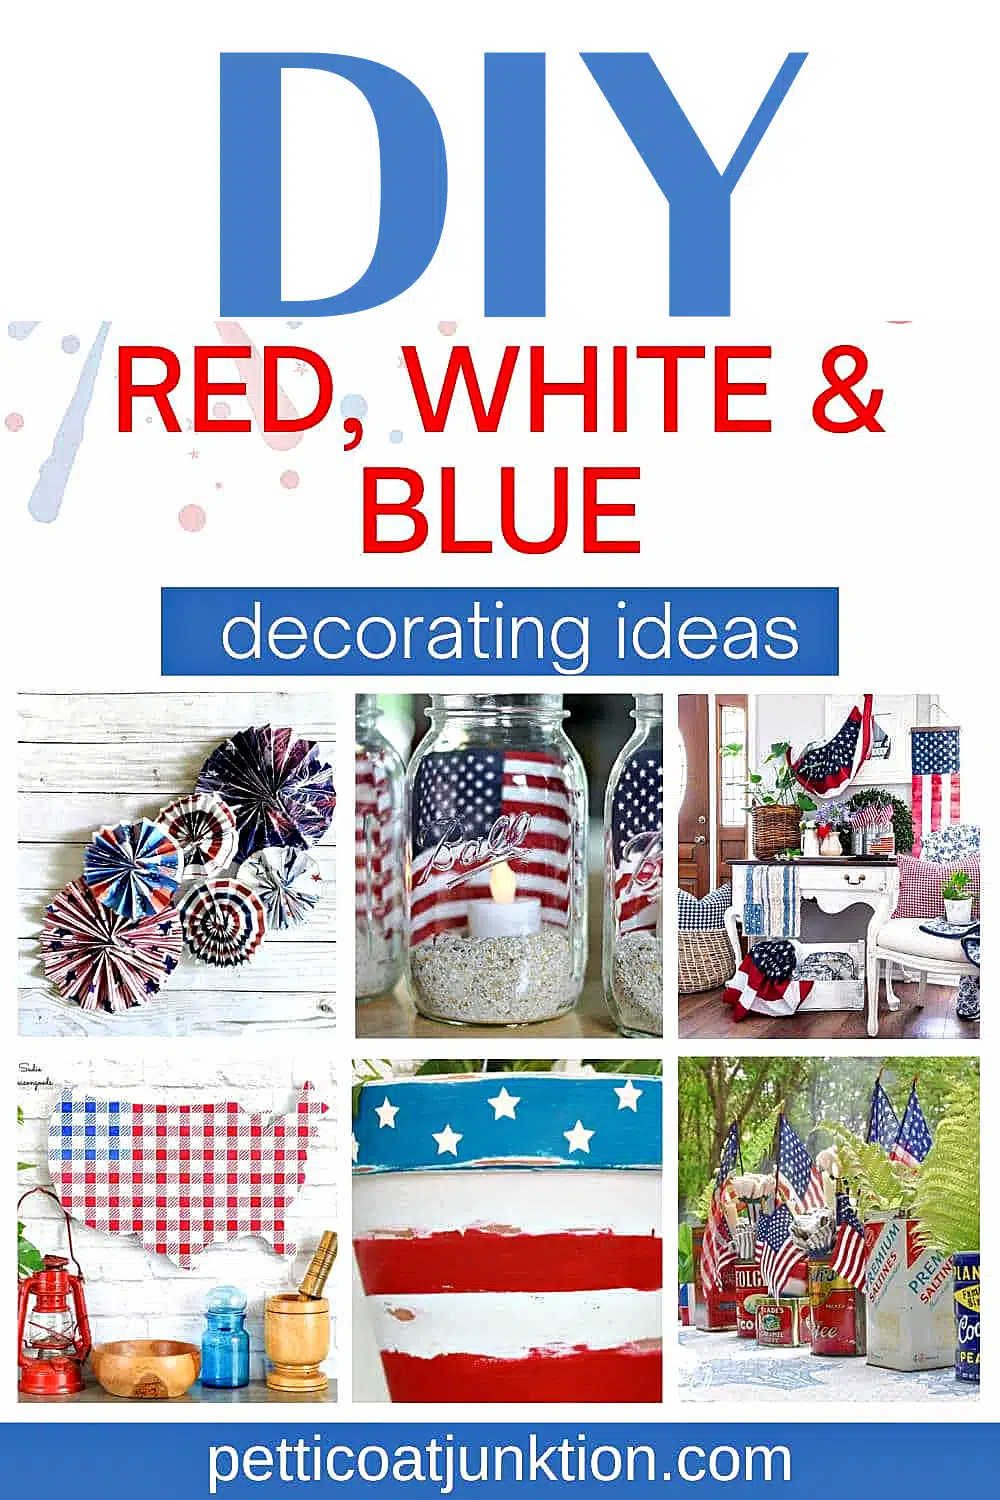 red, white, and blue decorating ideas